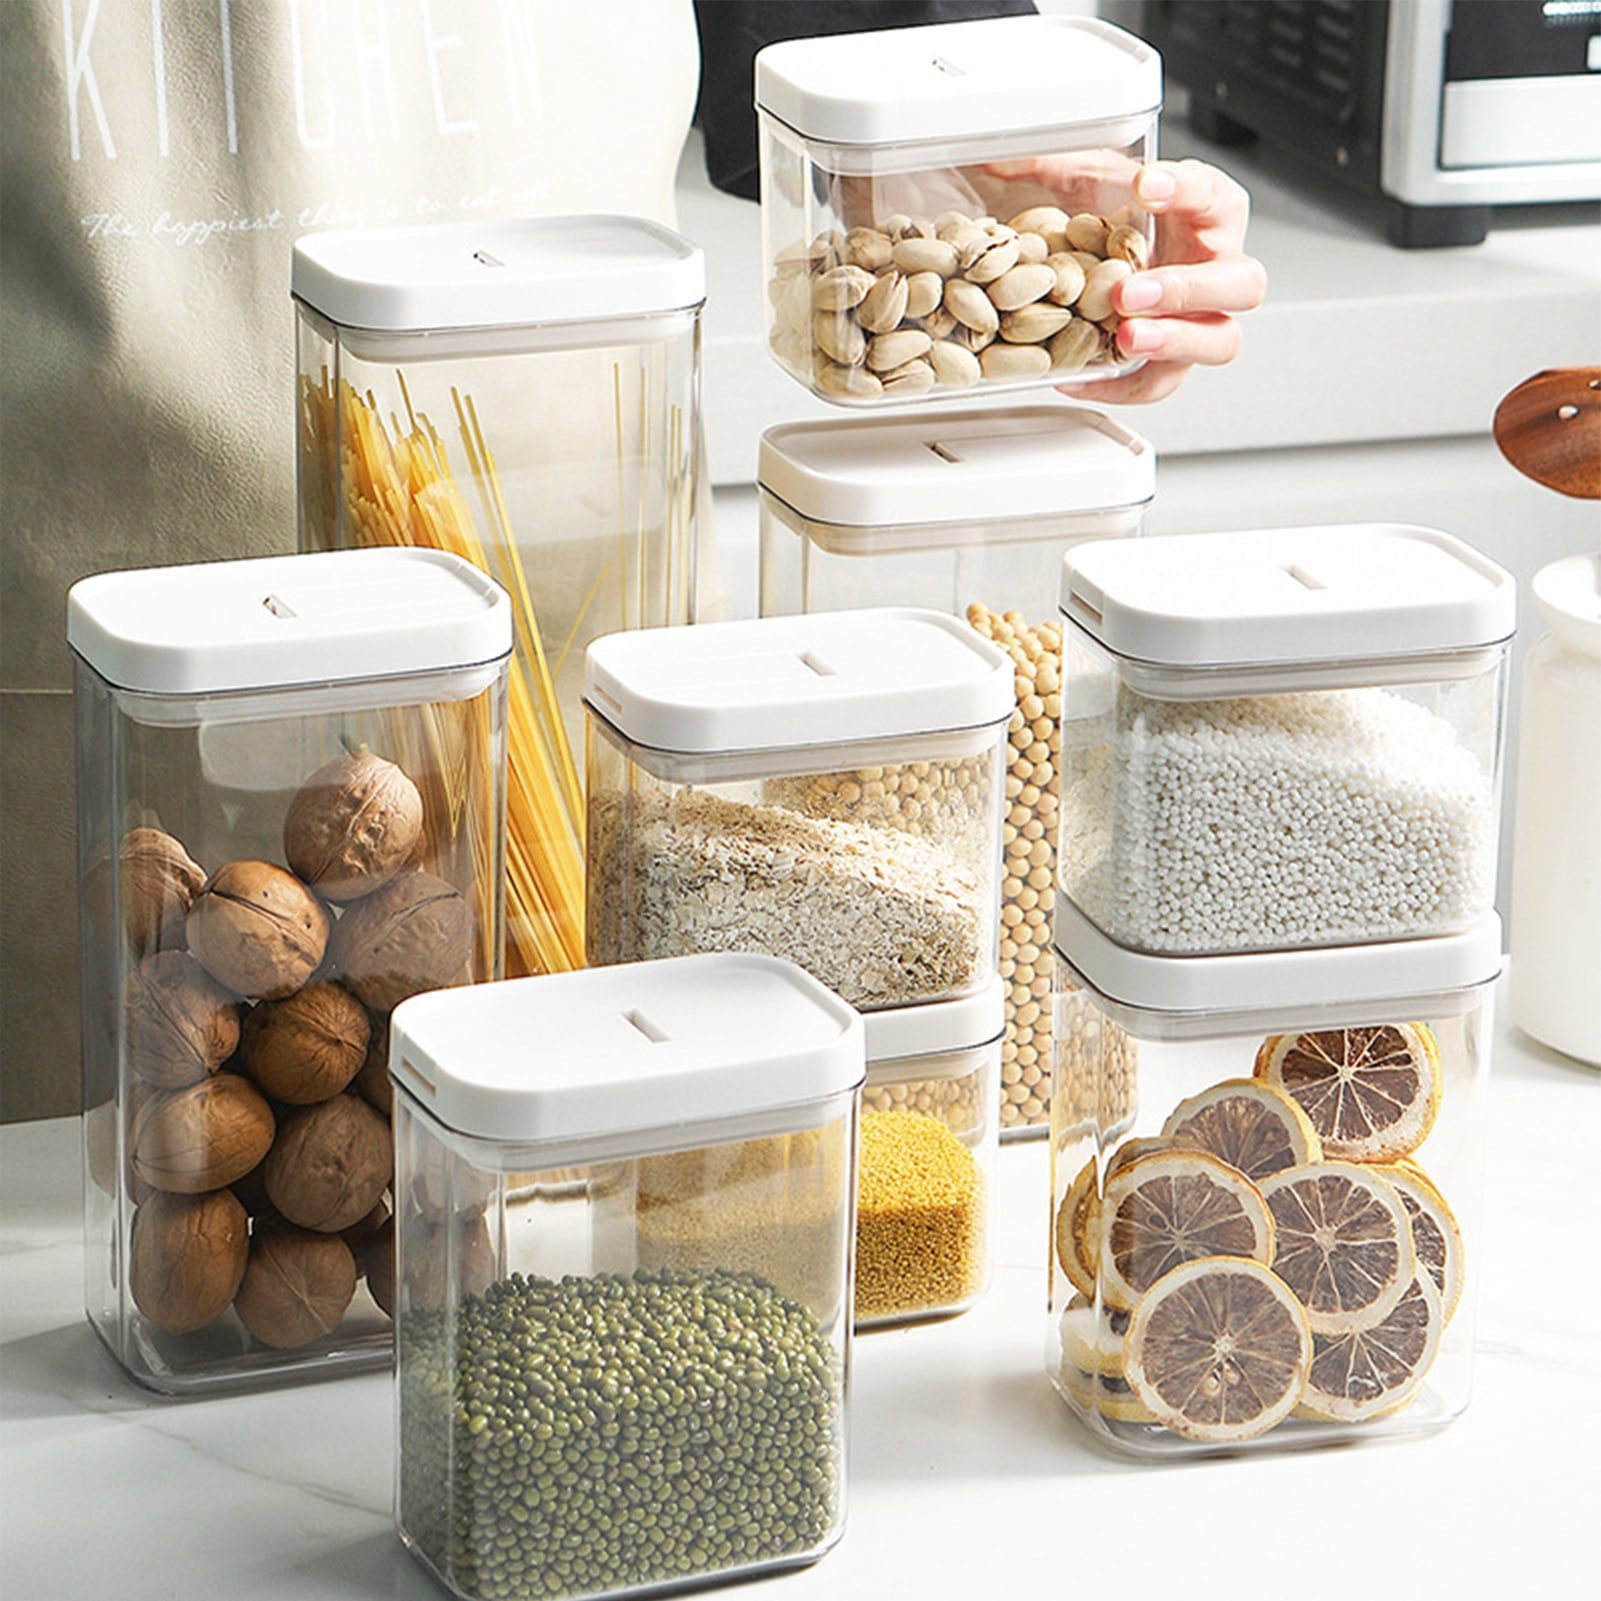 Cheer Collection Set of 24 Airtight Food Storage Containers - Clear